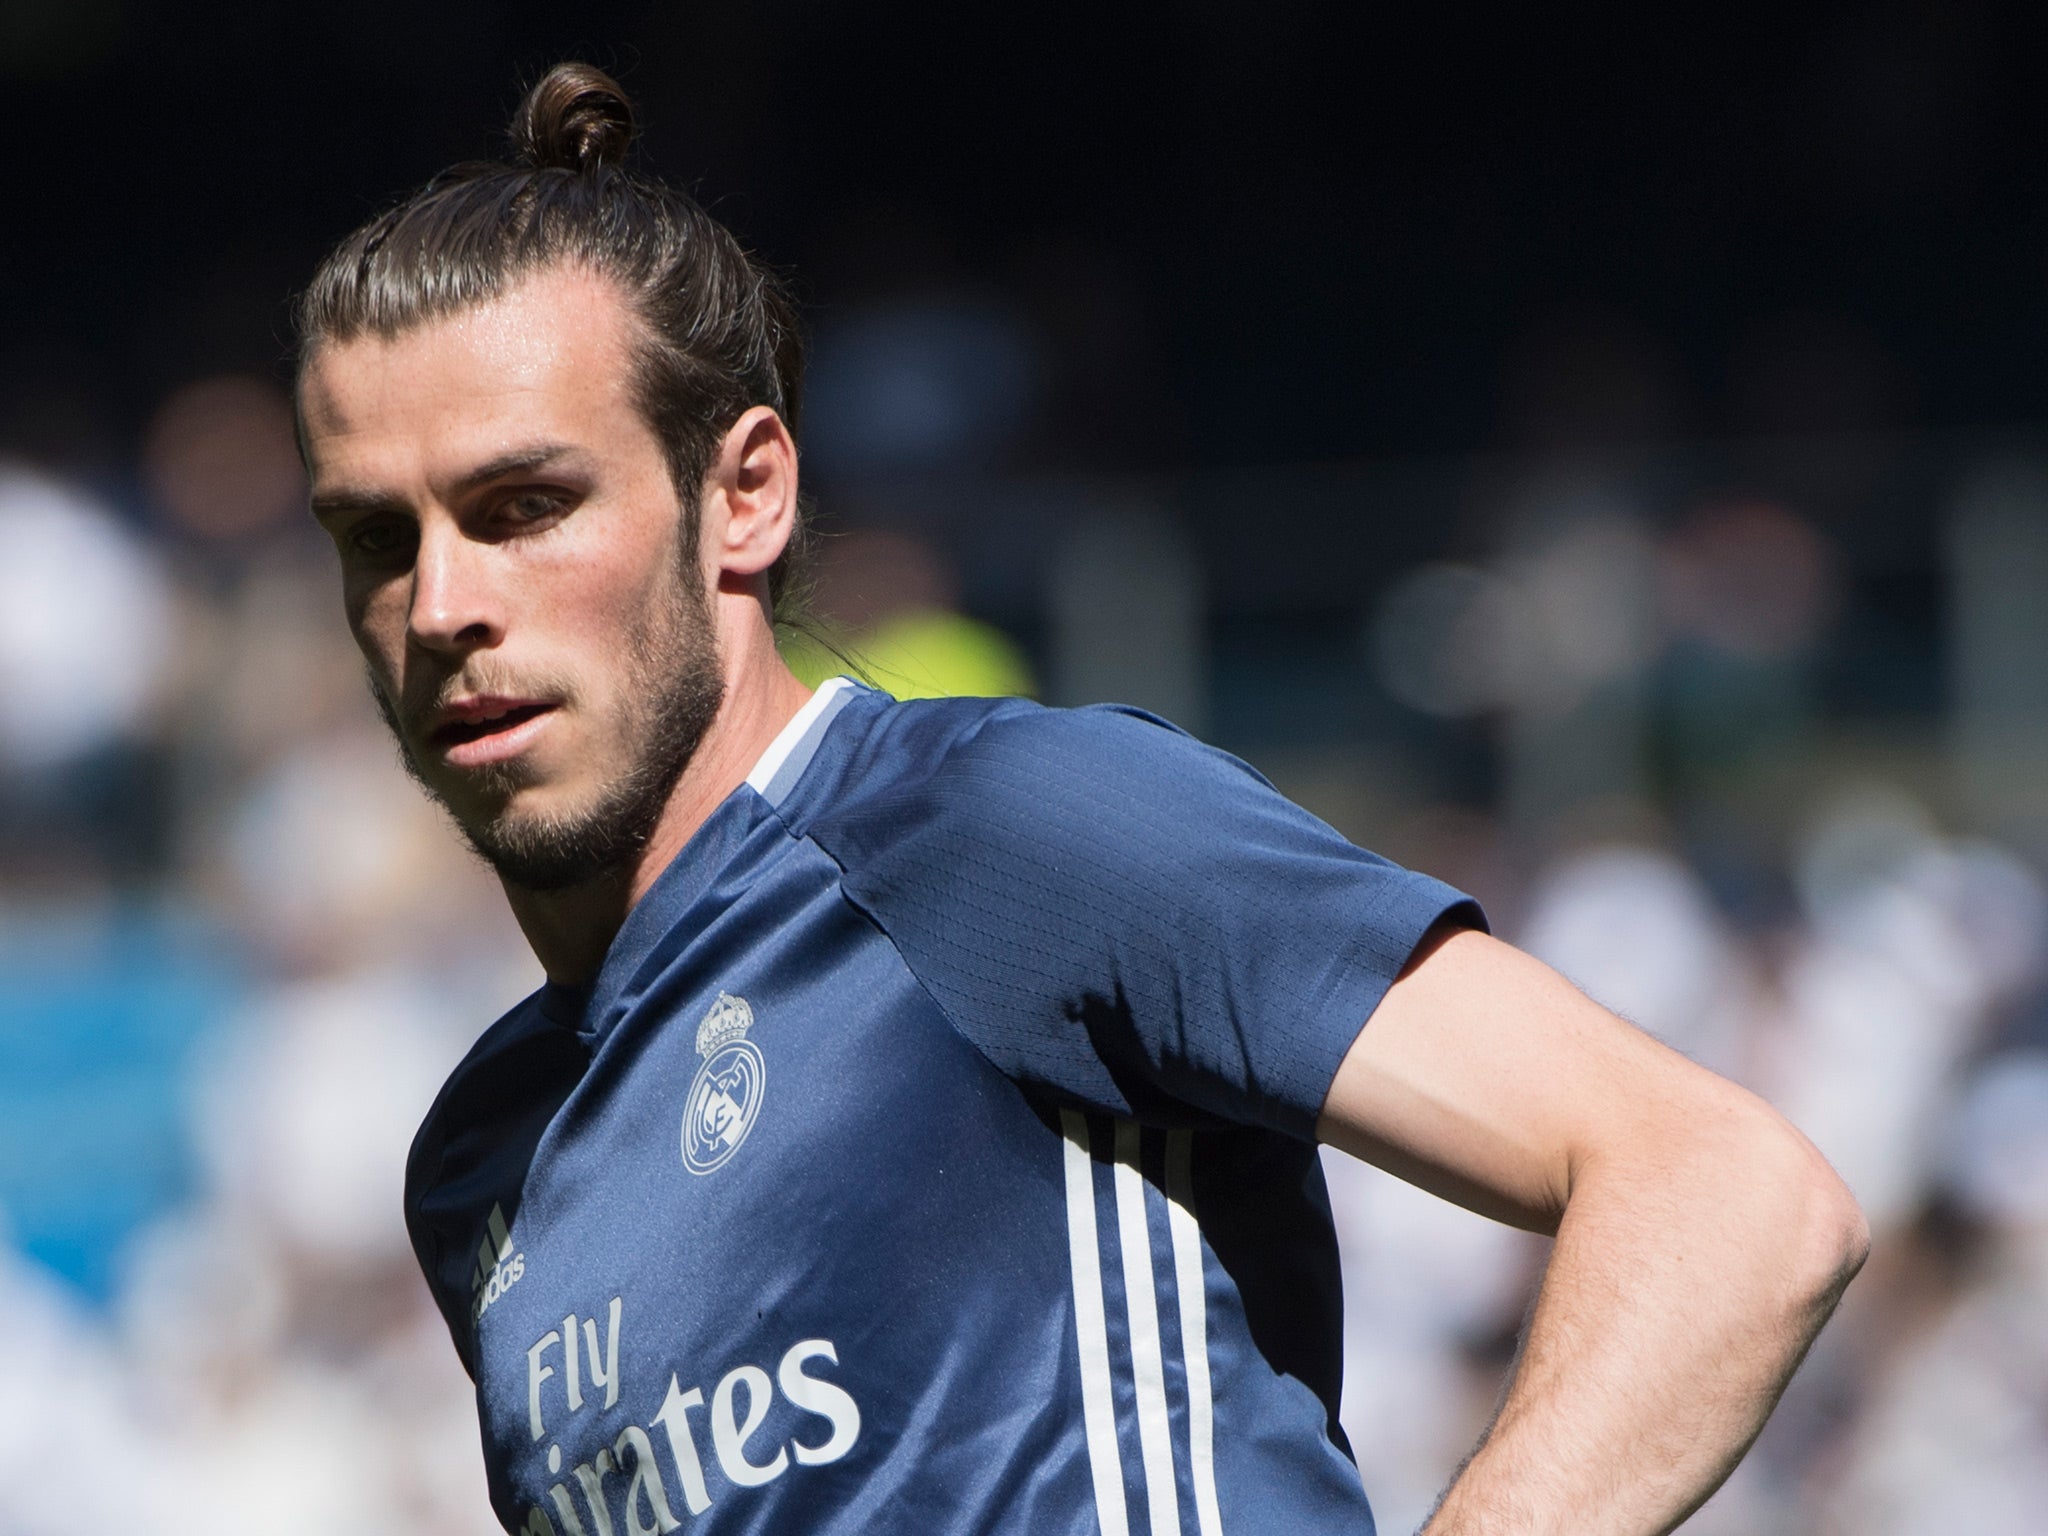 Gareth Bale missed Tuesday's Champions League quarter-final against Bayern